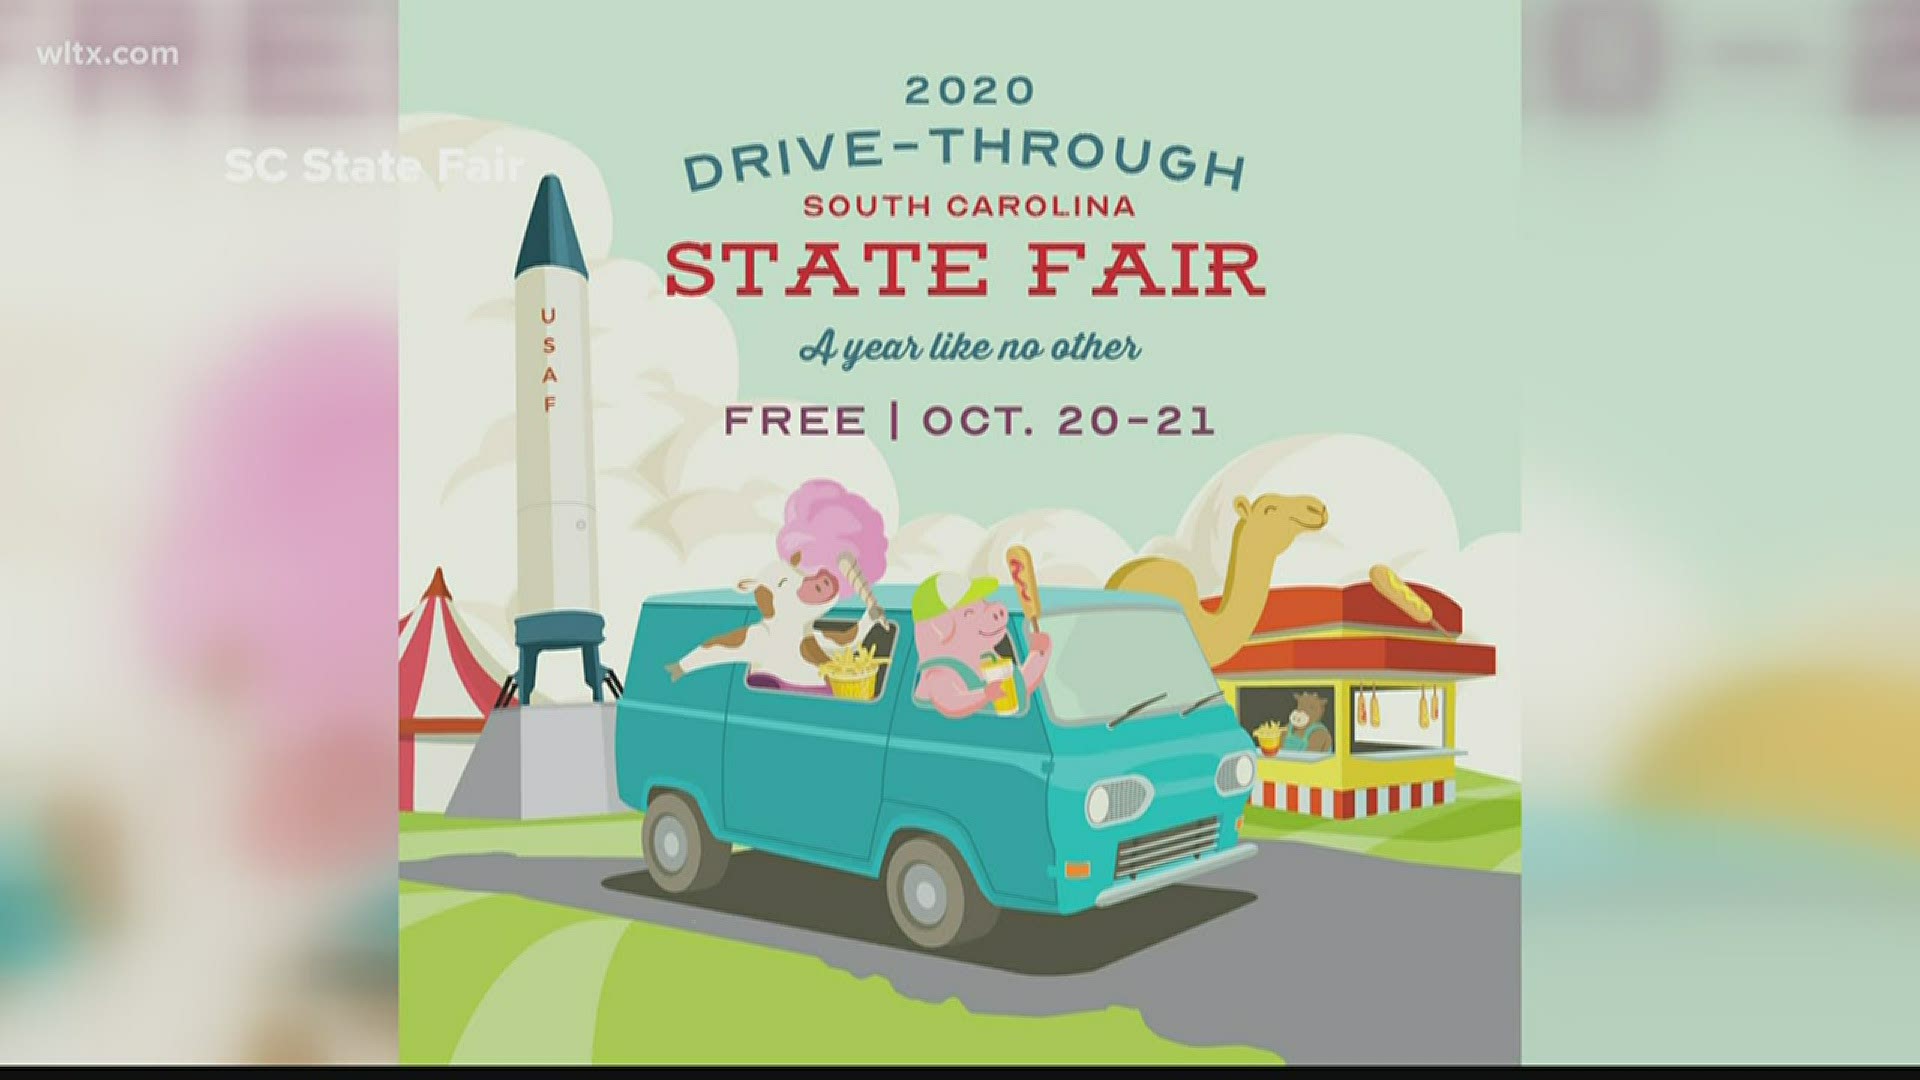 Due to the coronavirus pandemic, it will switch from its usually traditional look to a drive-thru setup on October 20th and the 21st.